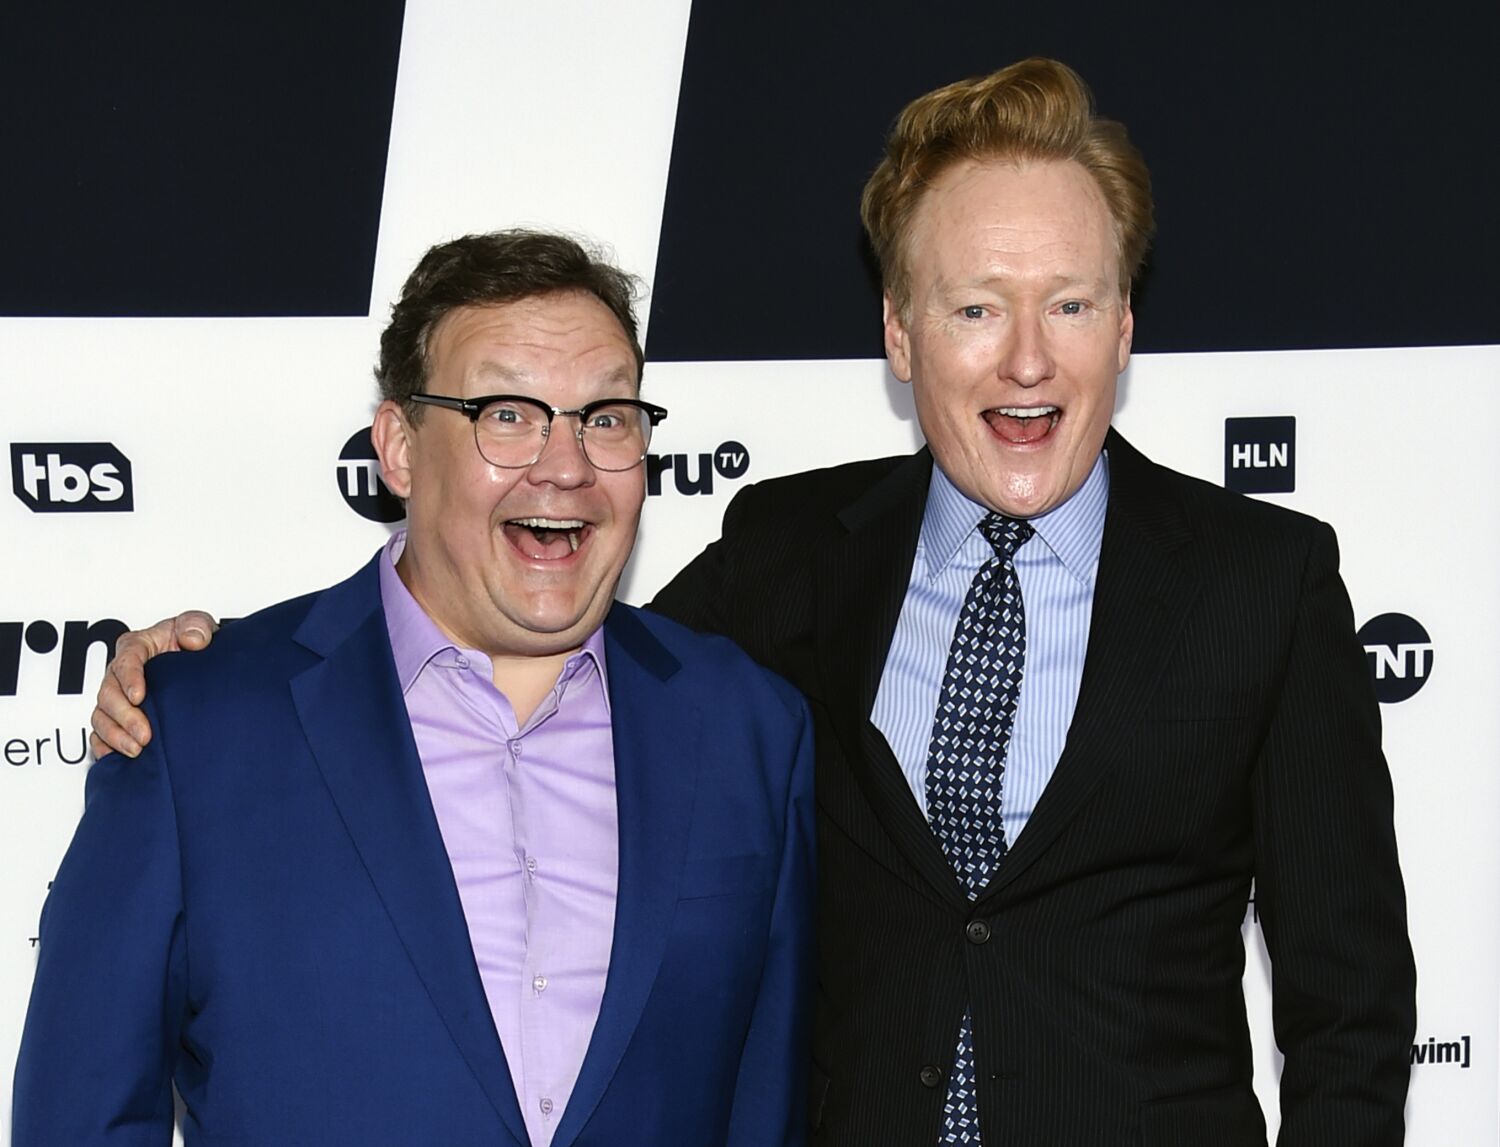 Conan O'Brien is a last-minute sub to officiate the wedding of ex-sidekick Andy Richter